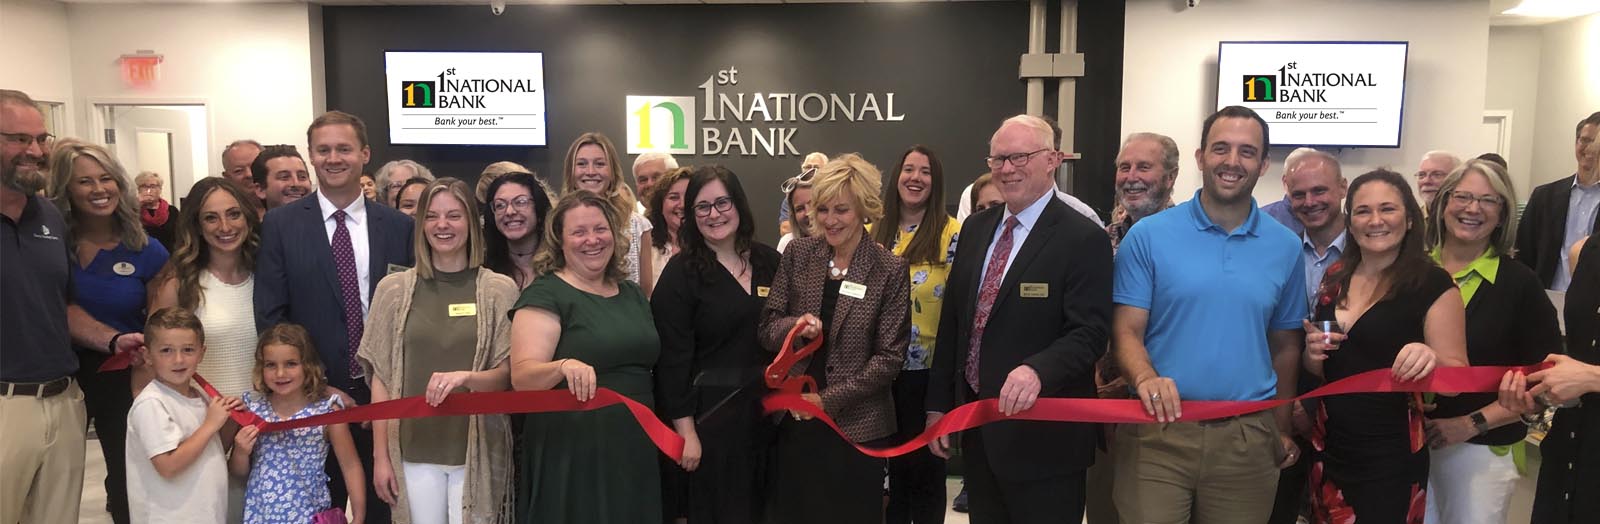 1st national bank team at headquarters grand opening